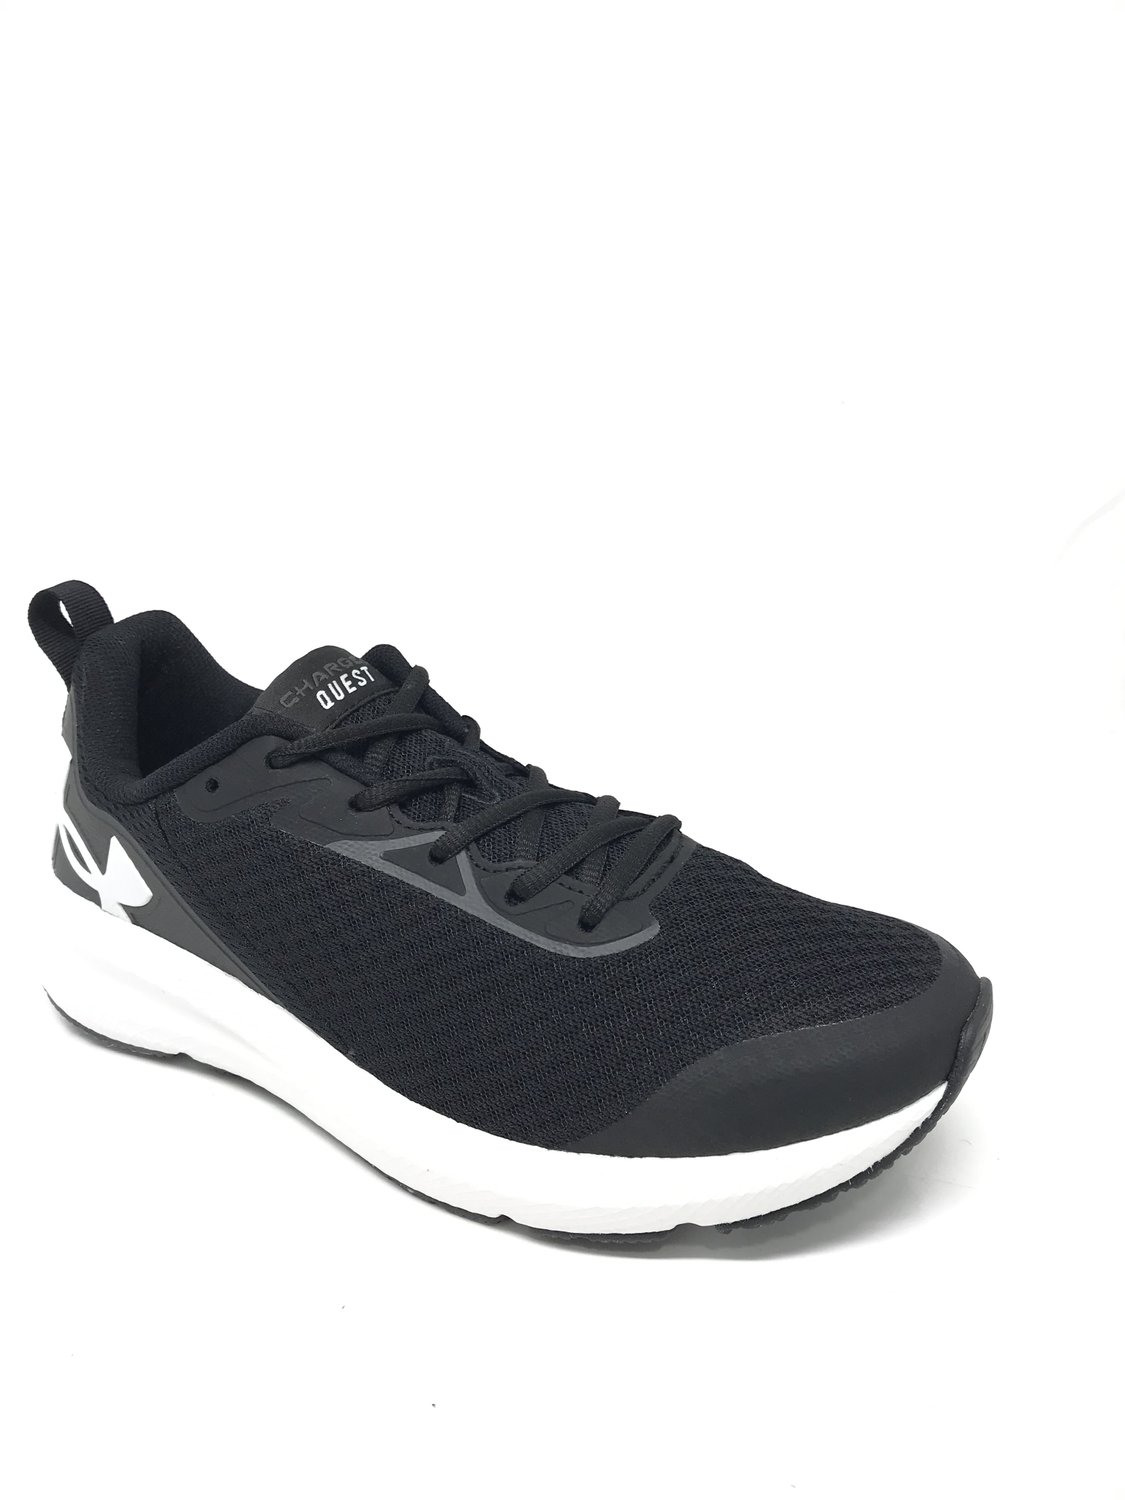 Tênis Under Armour Charged First Preto Preto